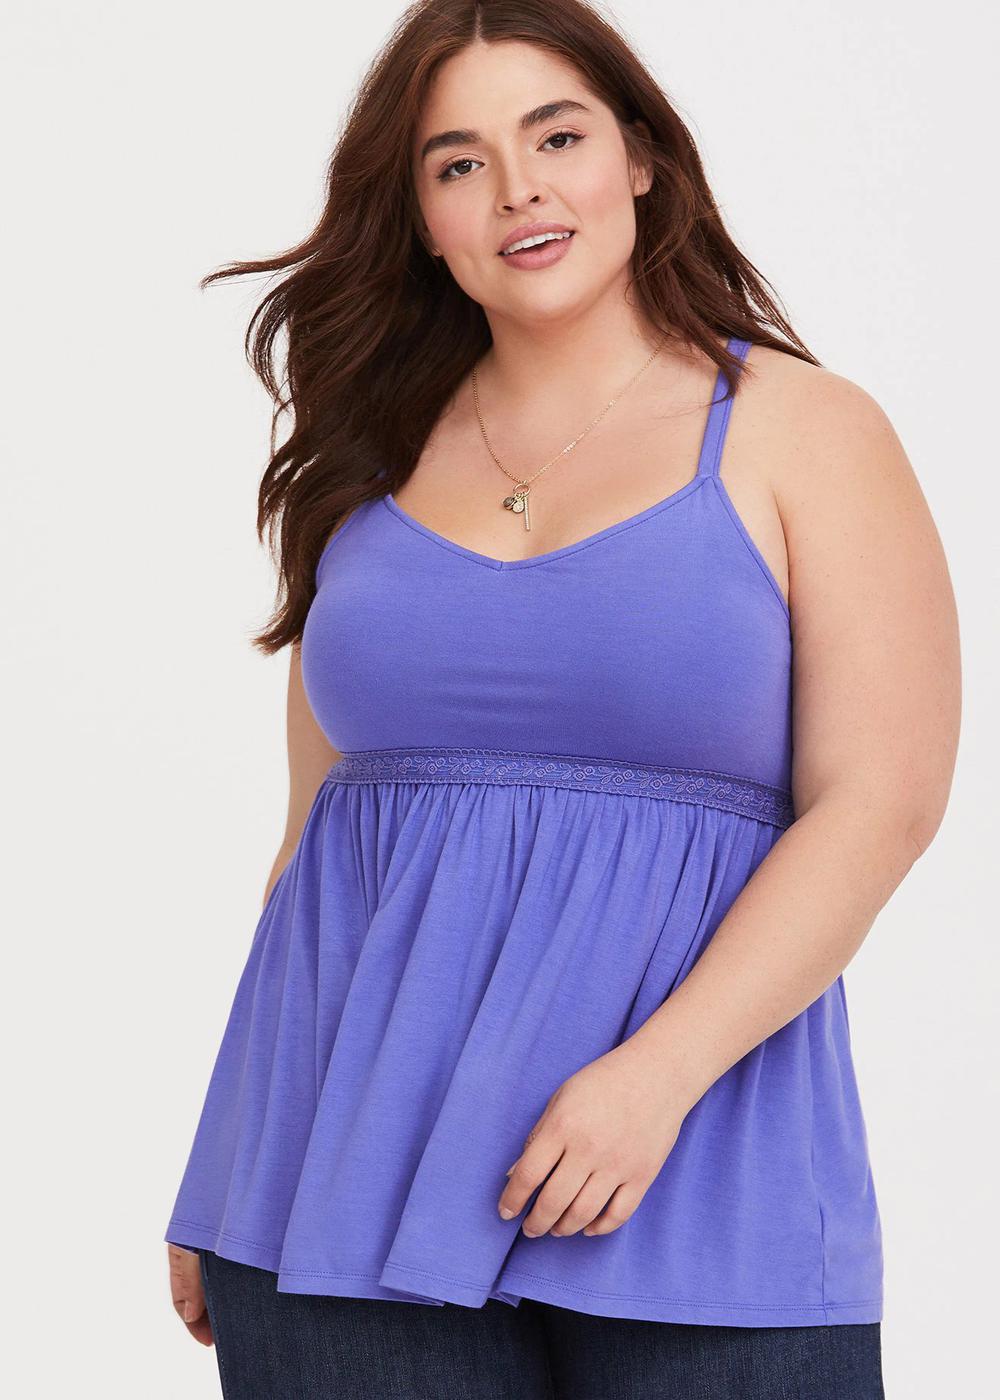 Torrid Similar stores, new products, store review, Q&A Modvisor